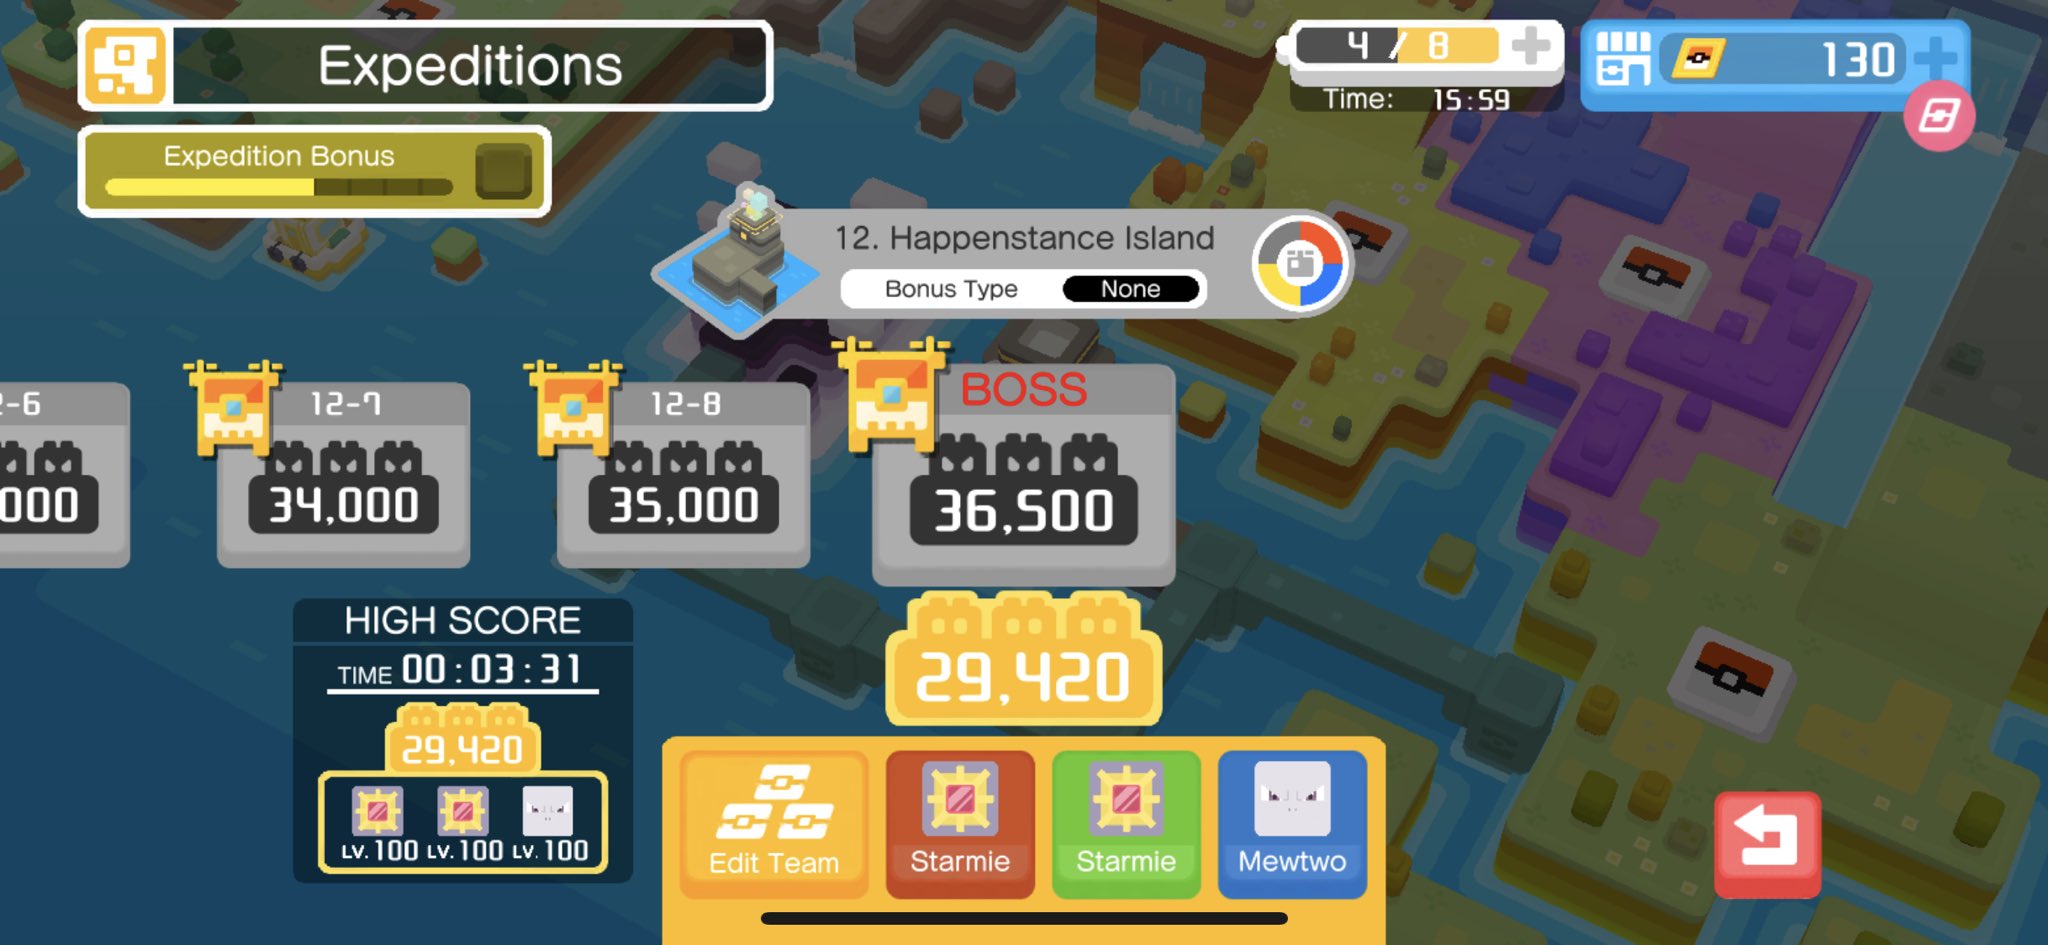 Justin Wong on X: FINALLY BEAT THE LAST LEVEL ON POKÉMON QUEST! DOUBLE  STARMIE + MEWTWO BULK UP TOO OP  / X